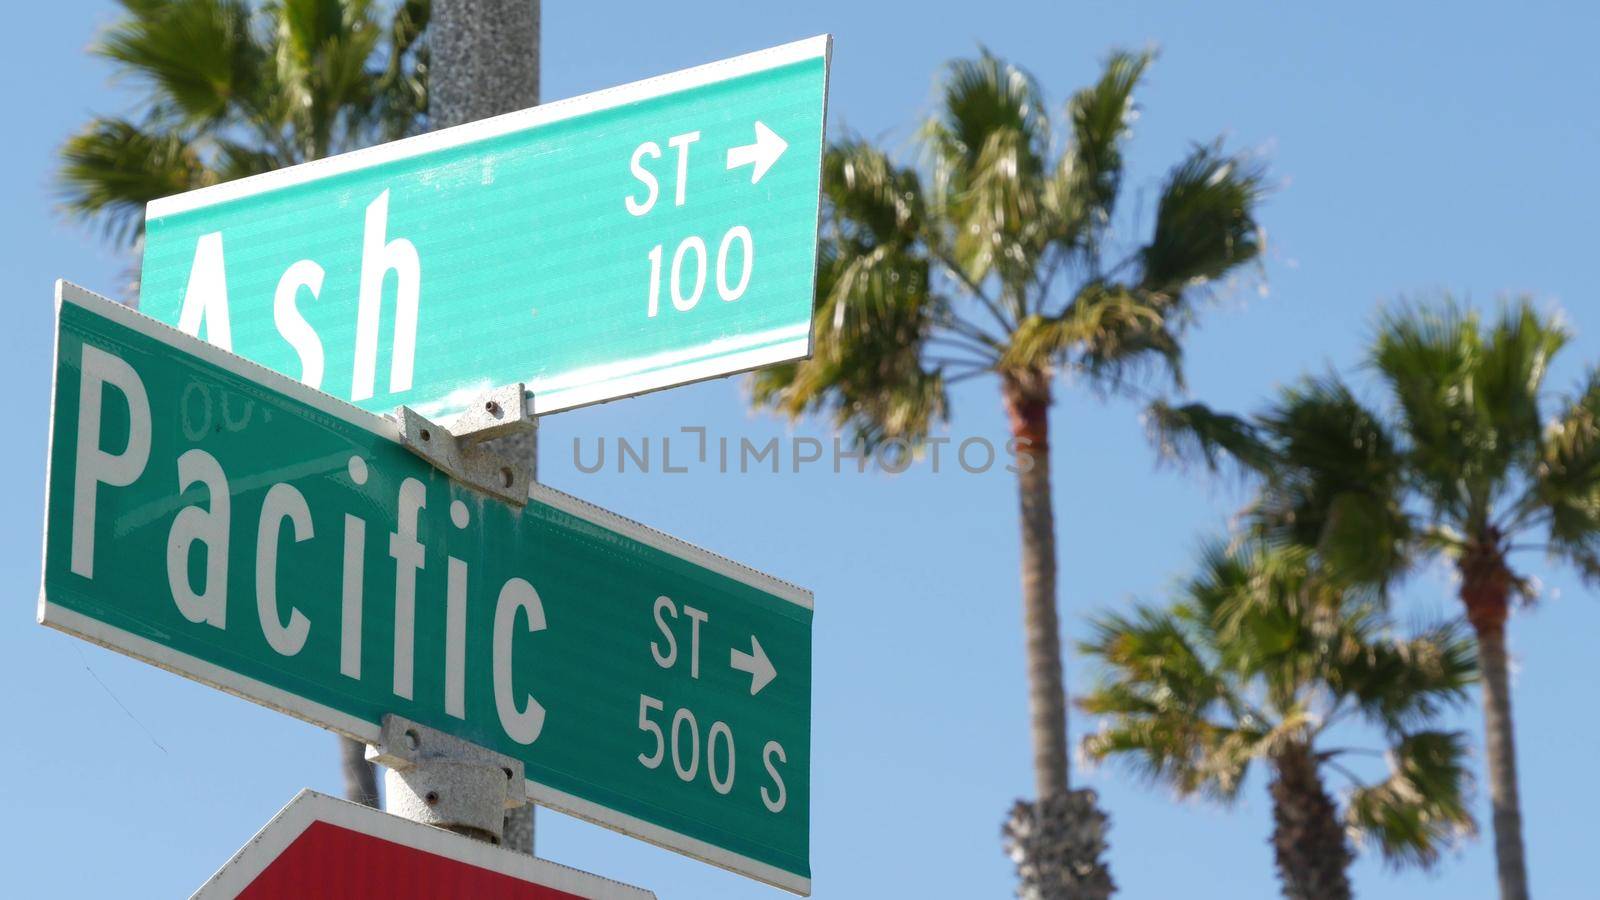 Pacific street road sign on crossroad, route 101 tourist destination, California, USA. Lettering on intersection signpost, symbol of summertime travel and vacations.Signboard in city near Los Angeles.